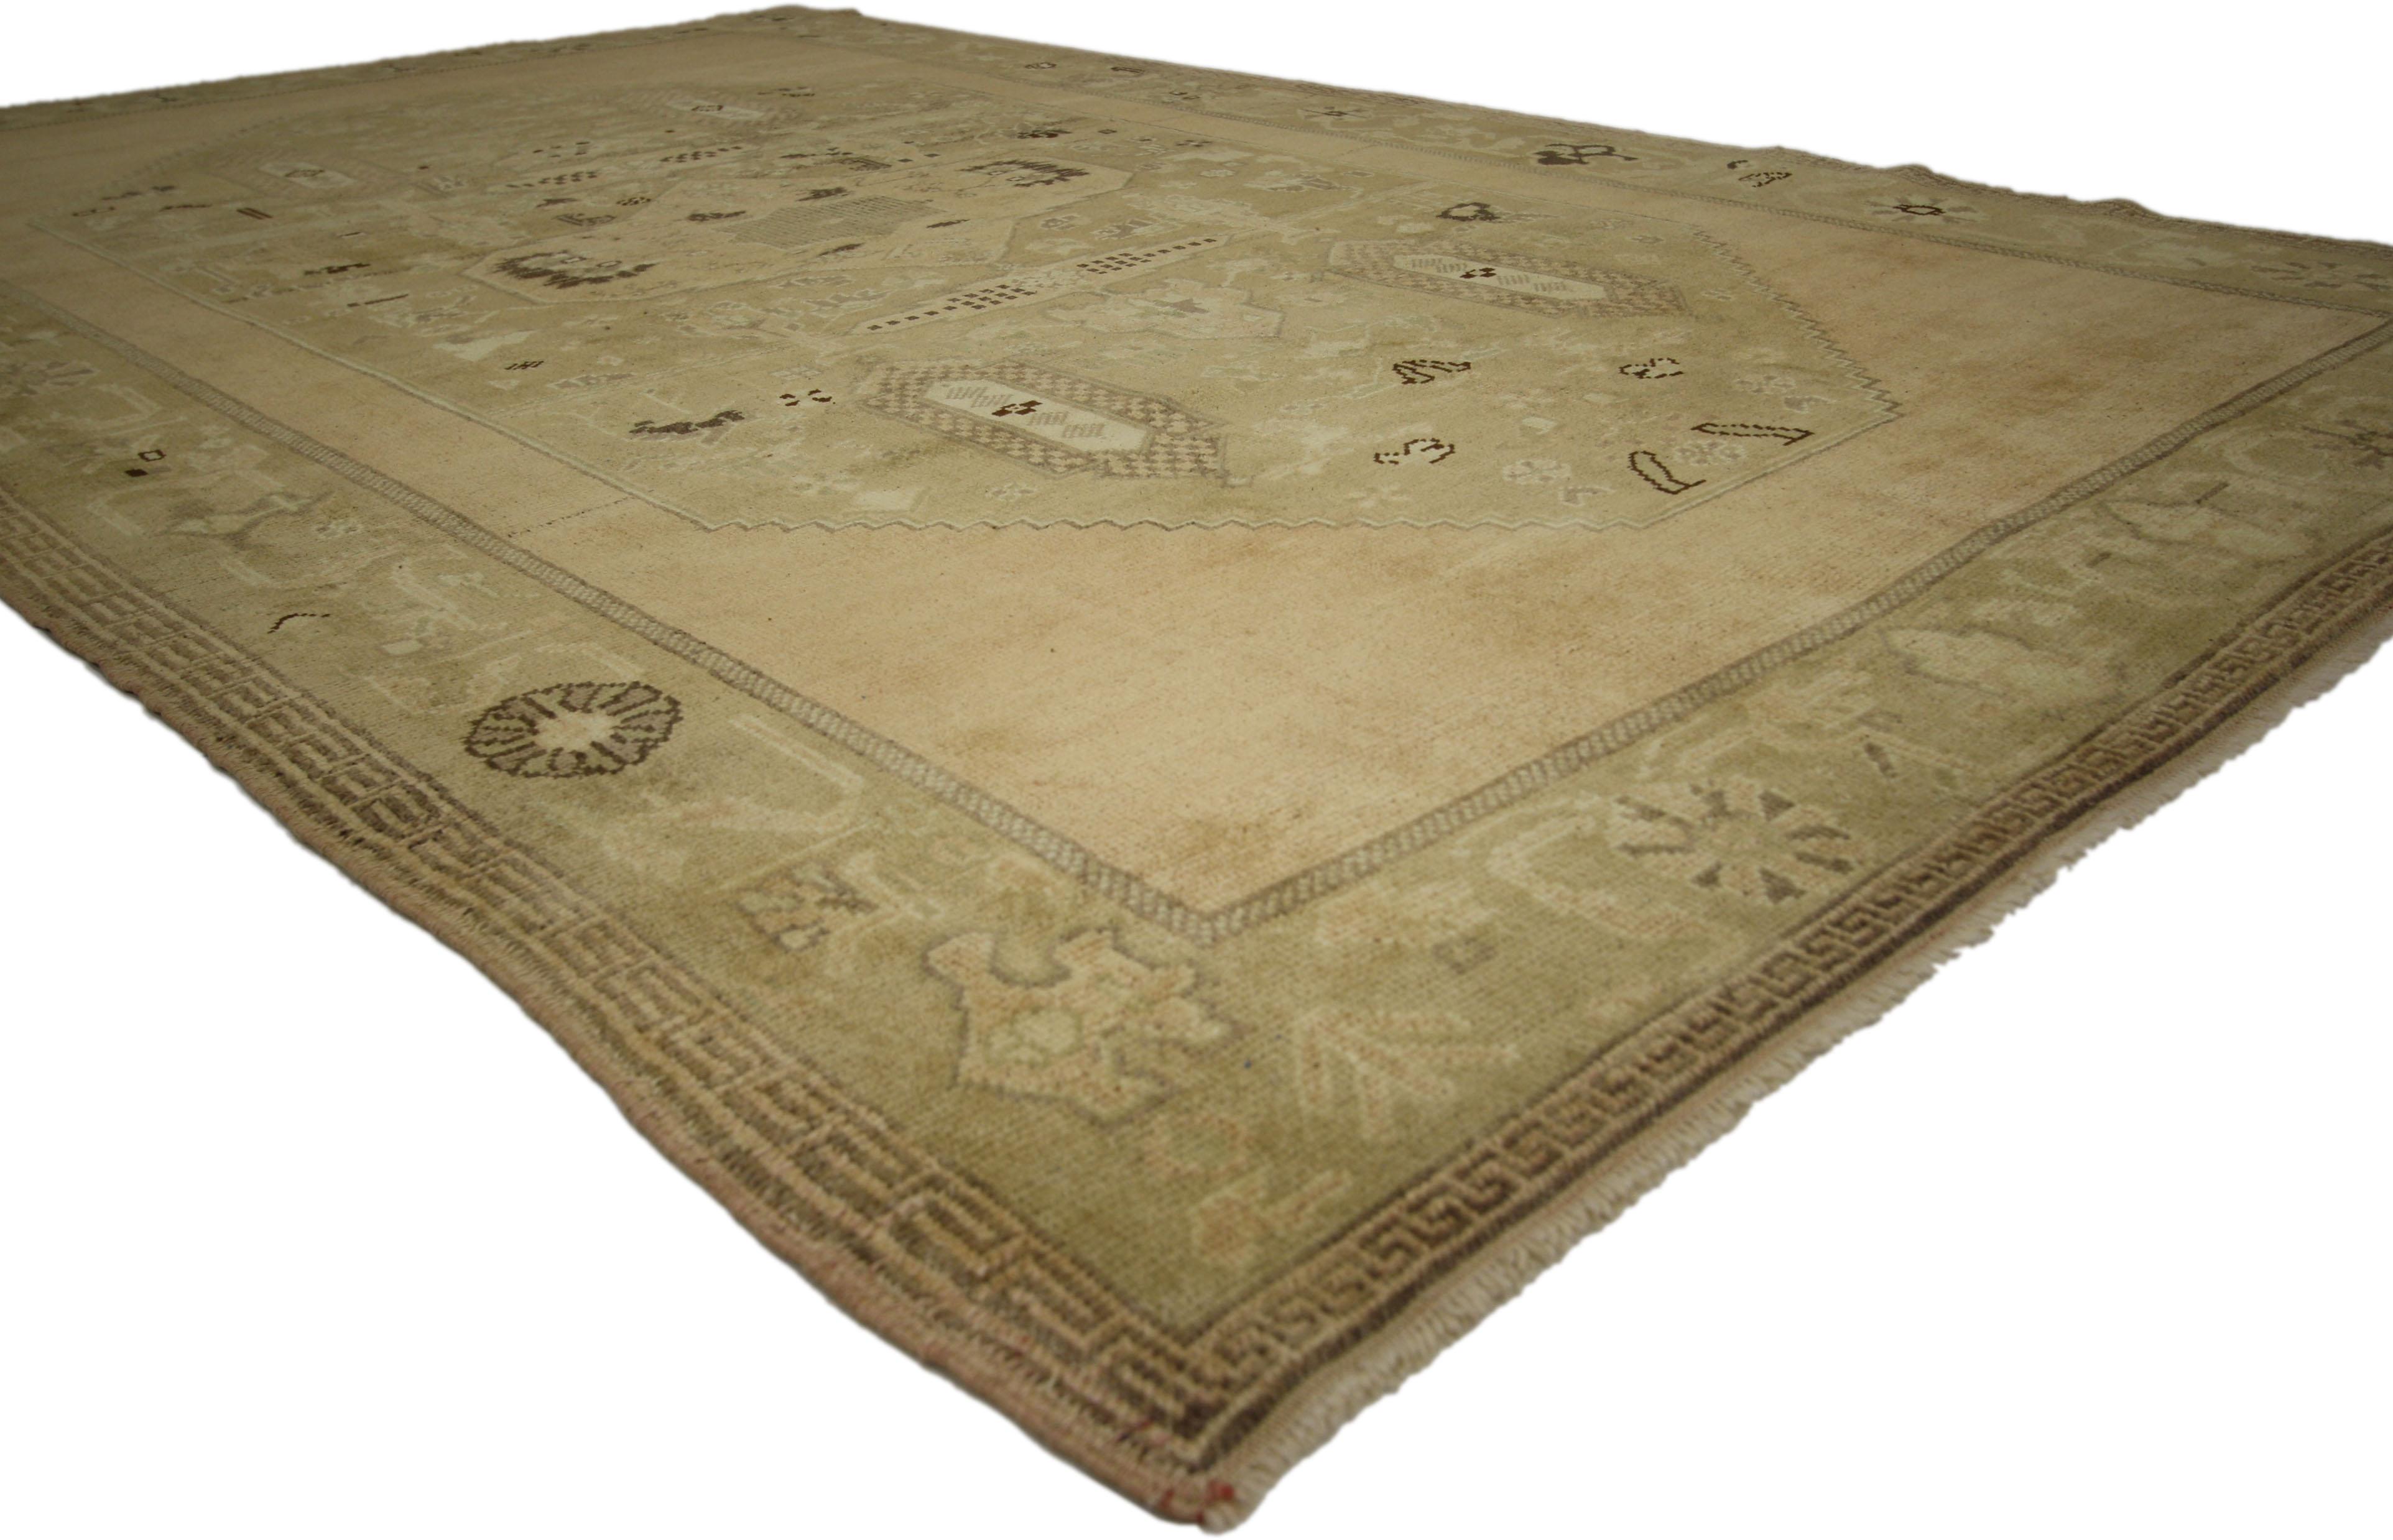 50483, vintage Turkish Oushak gallery rug with rustic chinoiserie style and warm colors. This hand knotted wool vintage Turkish Oushak gallery rug features a large stepped medallion filled with ancient Anatolian motifs. Intimate floral and